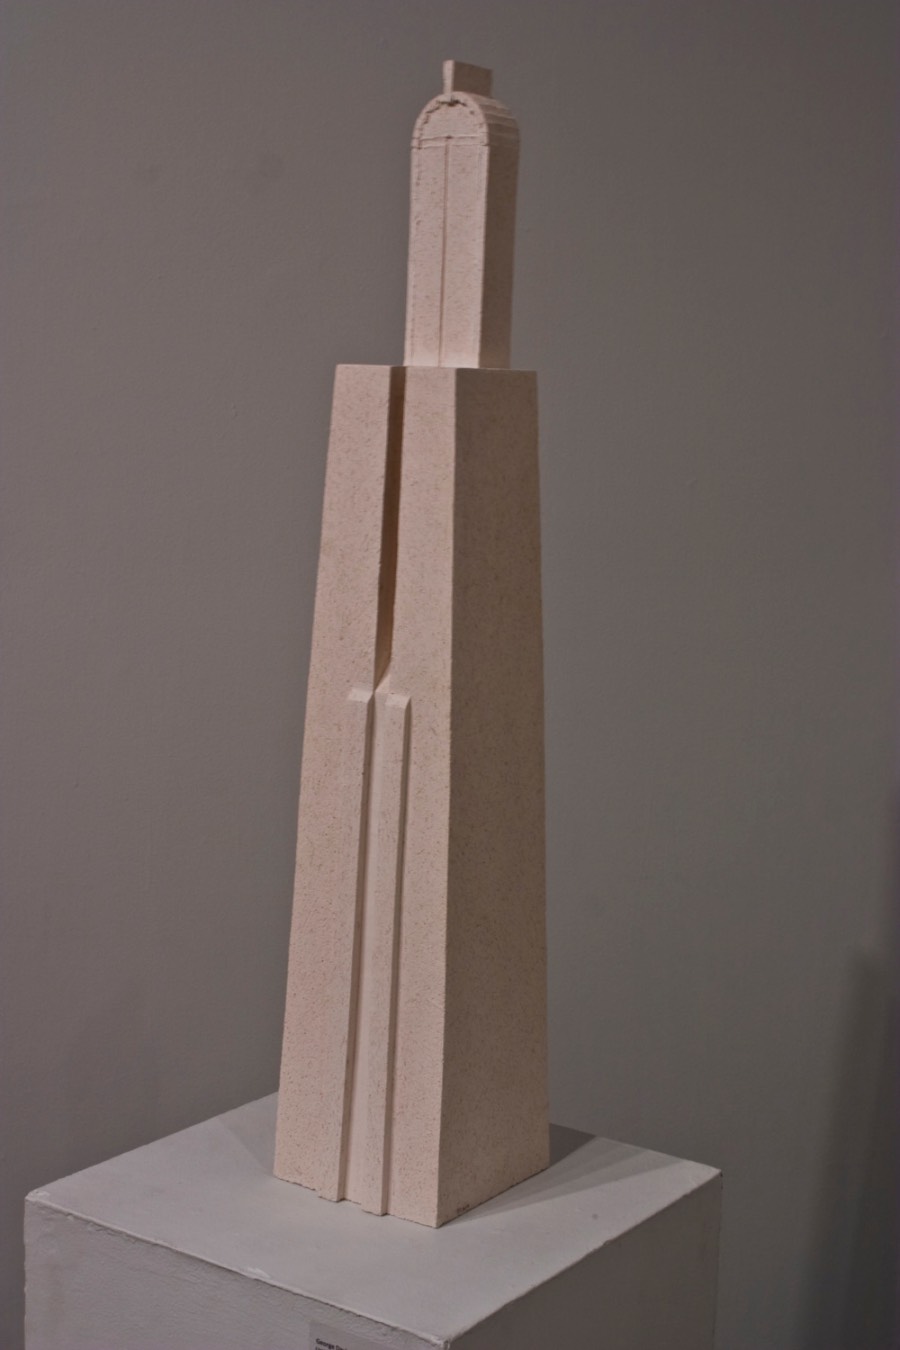 Tall and narrow geometric architectural porcelain sculpture with four sides 